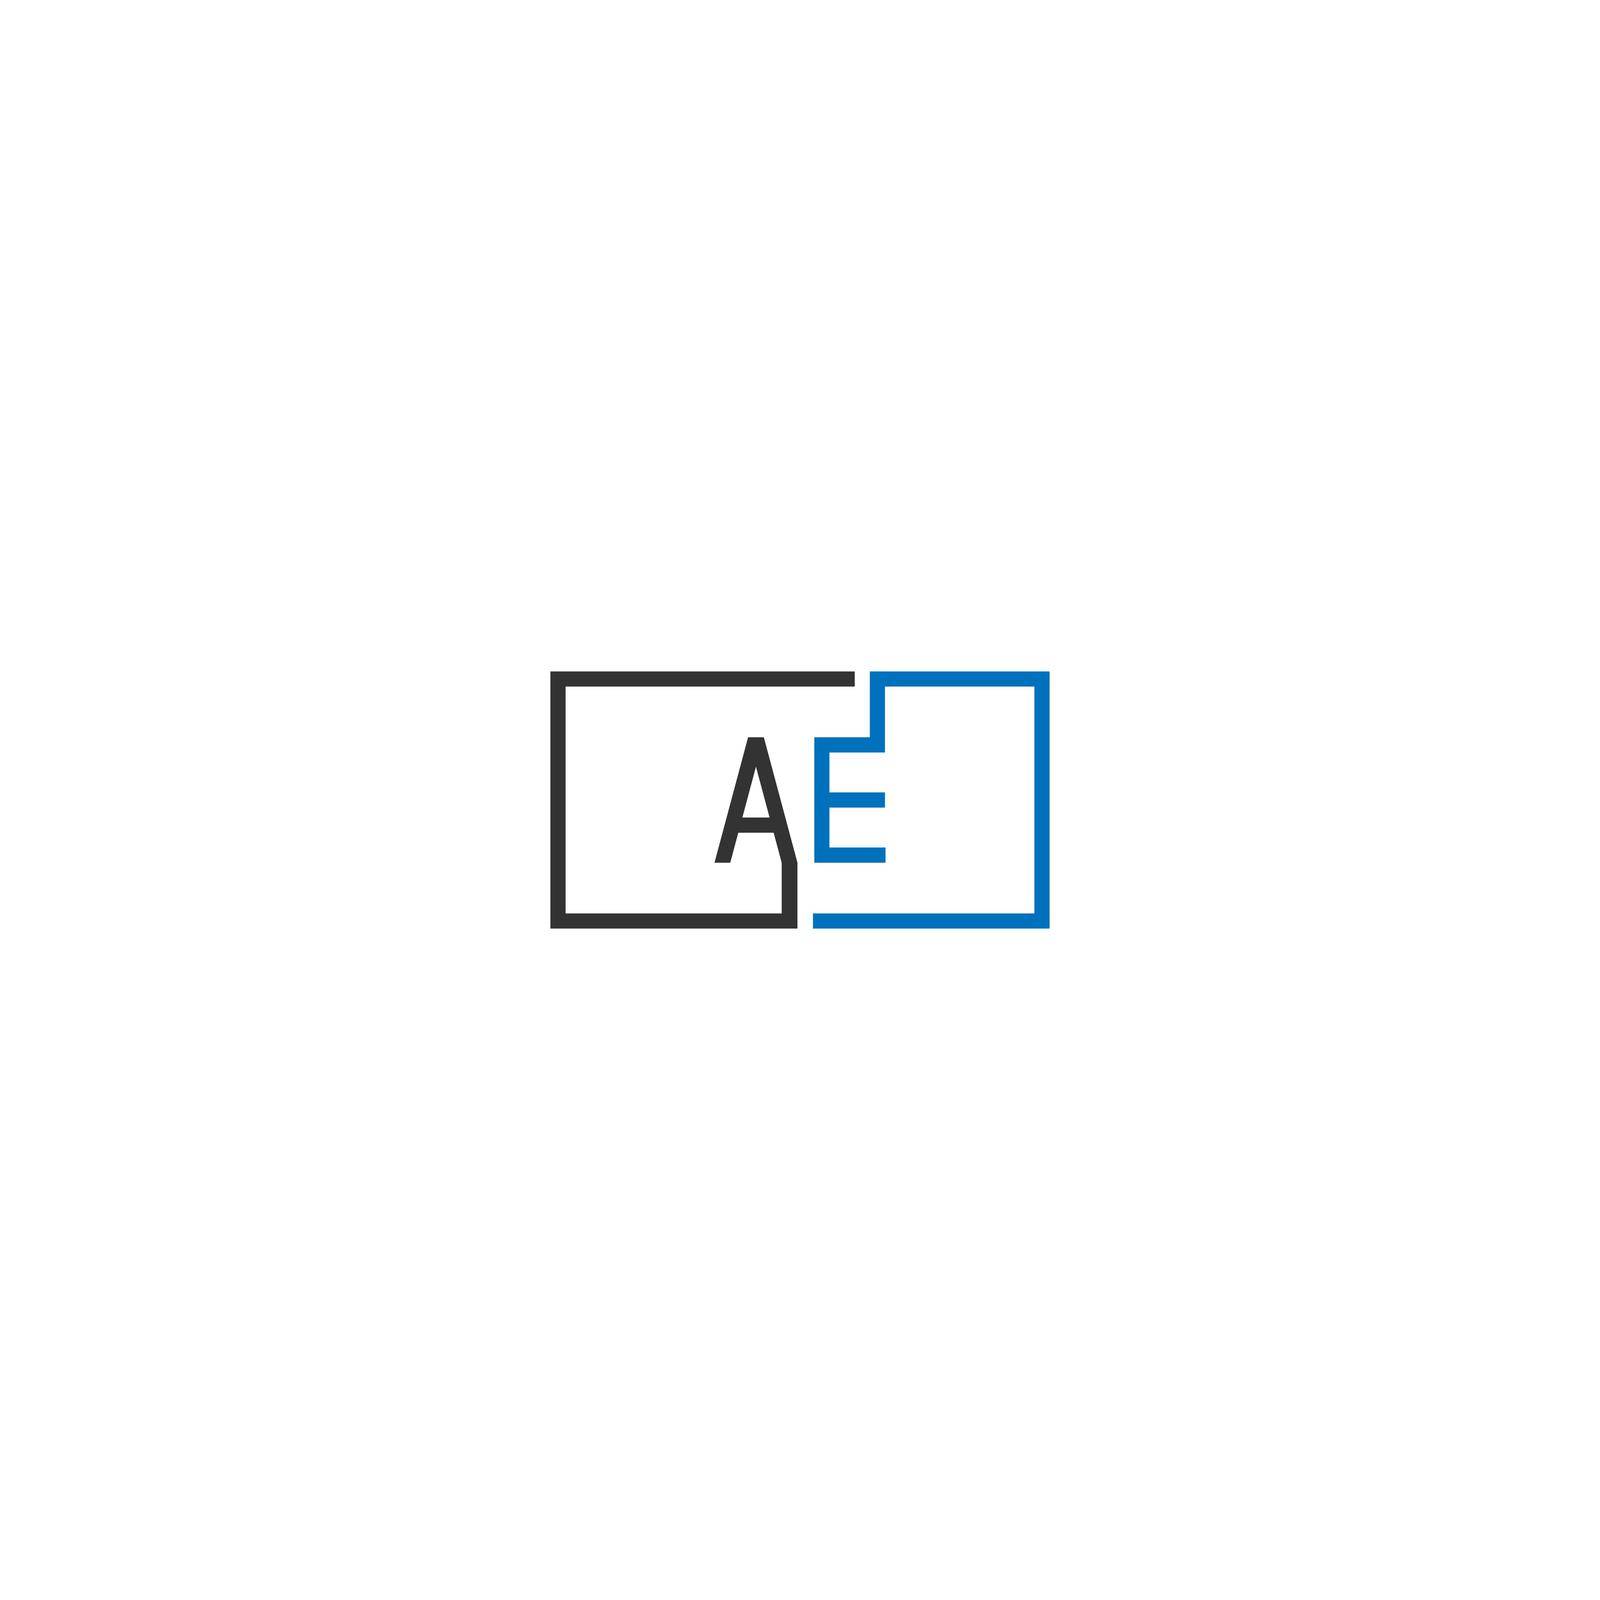 AE logo letter design concept by bellaxbudhong3